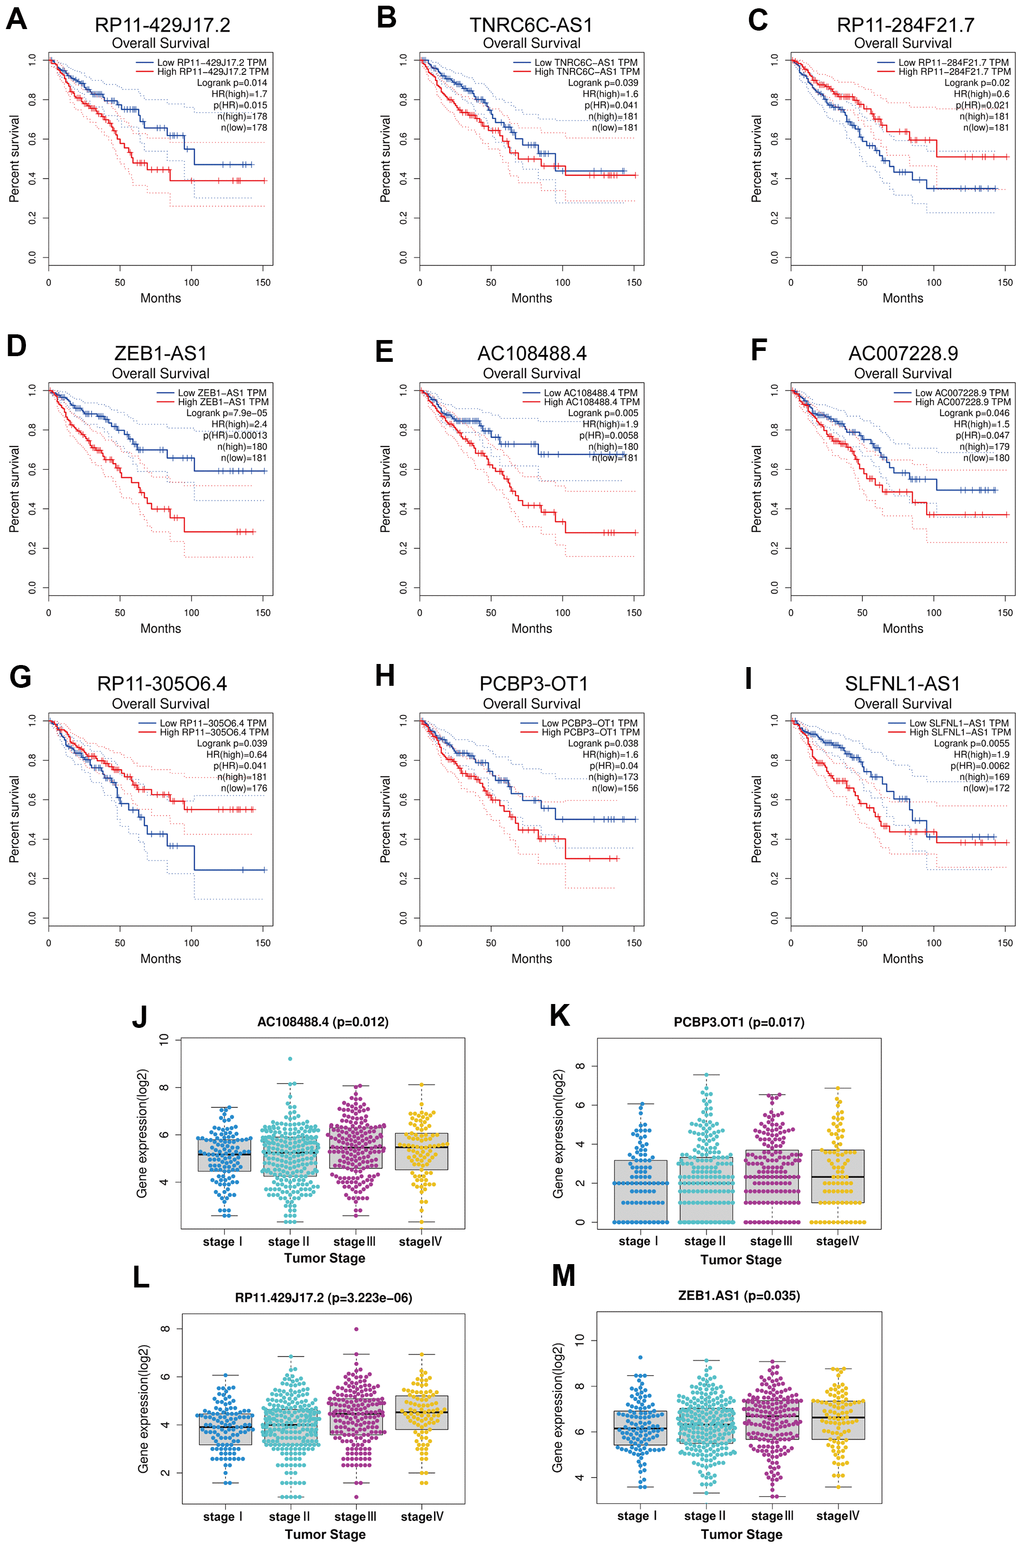 Survival analysis and expression analysis of upstream key lncRNAs. (A–I) Prognostic value of the nine lncRNAs (RP11-429J17.2, TNRC6C-AS1, RP11-284F21.7, ZEB1-AS1, AC108488.4, AC007228.9, RP11-305O6.4, PCBP3-OT1, SLFNL1-AS1) in CRC by using GEPIA database. (J–M) Expression analysis grouped by tumor stage of the four lncRNAs (RP11-429J17.2, AC108488.4, PCBP3-OT1, ZEB1-AS1) in CRC by using TCGA project.